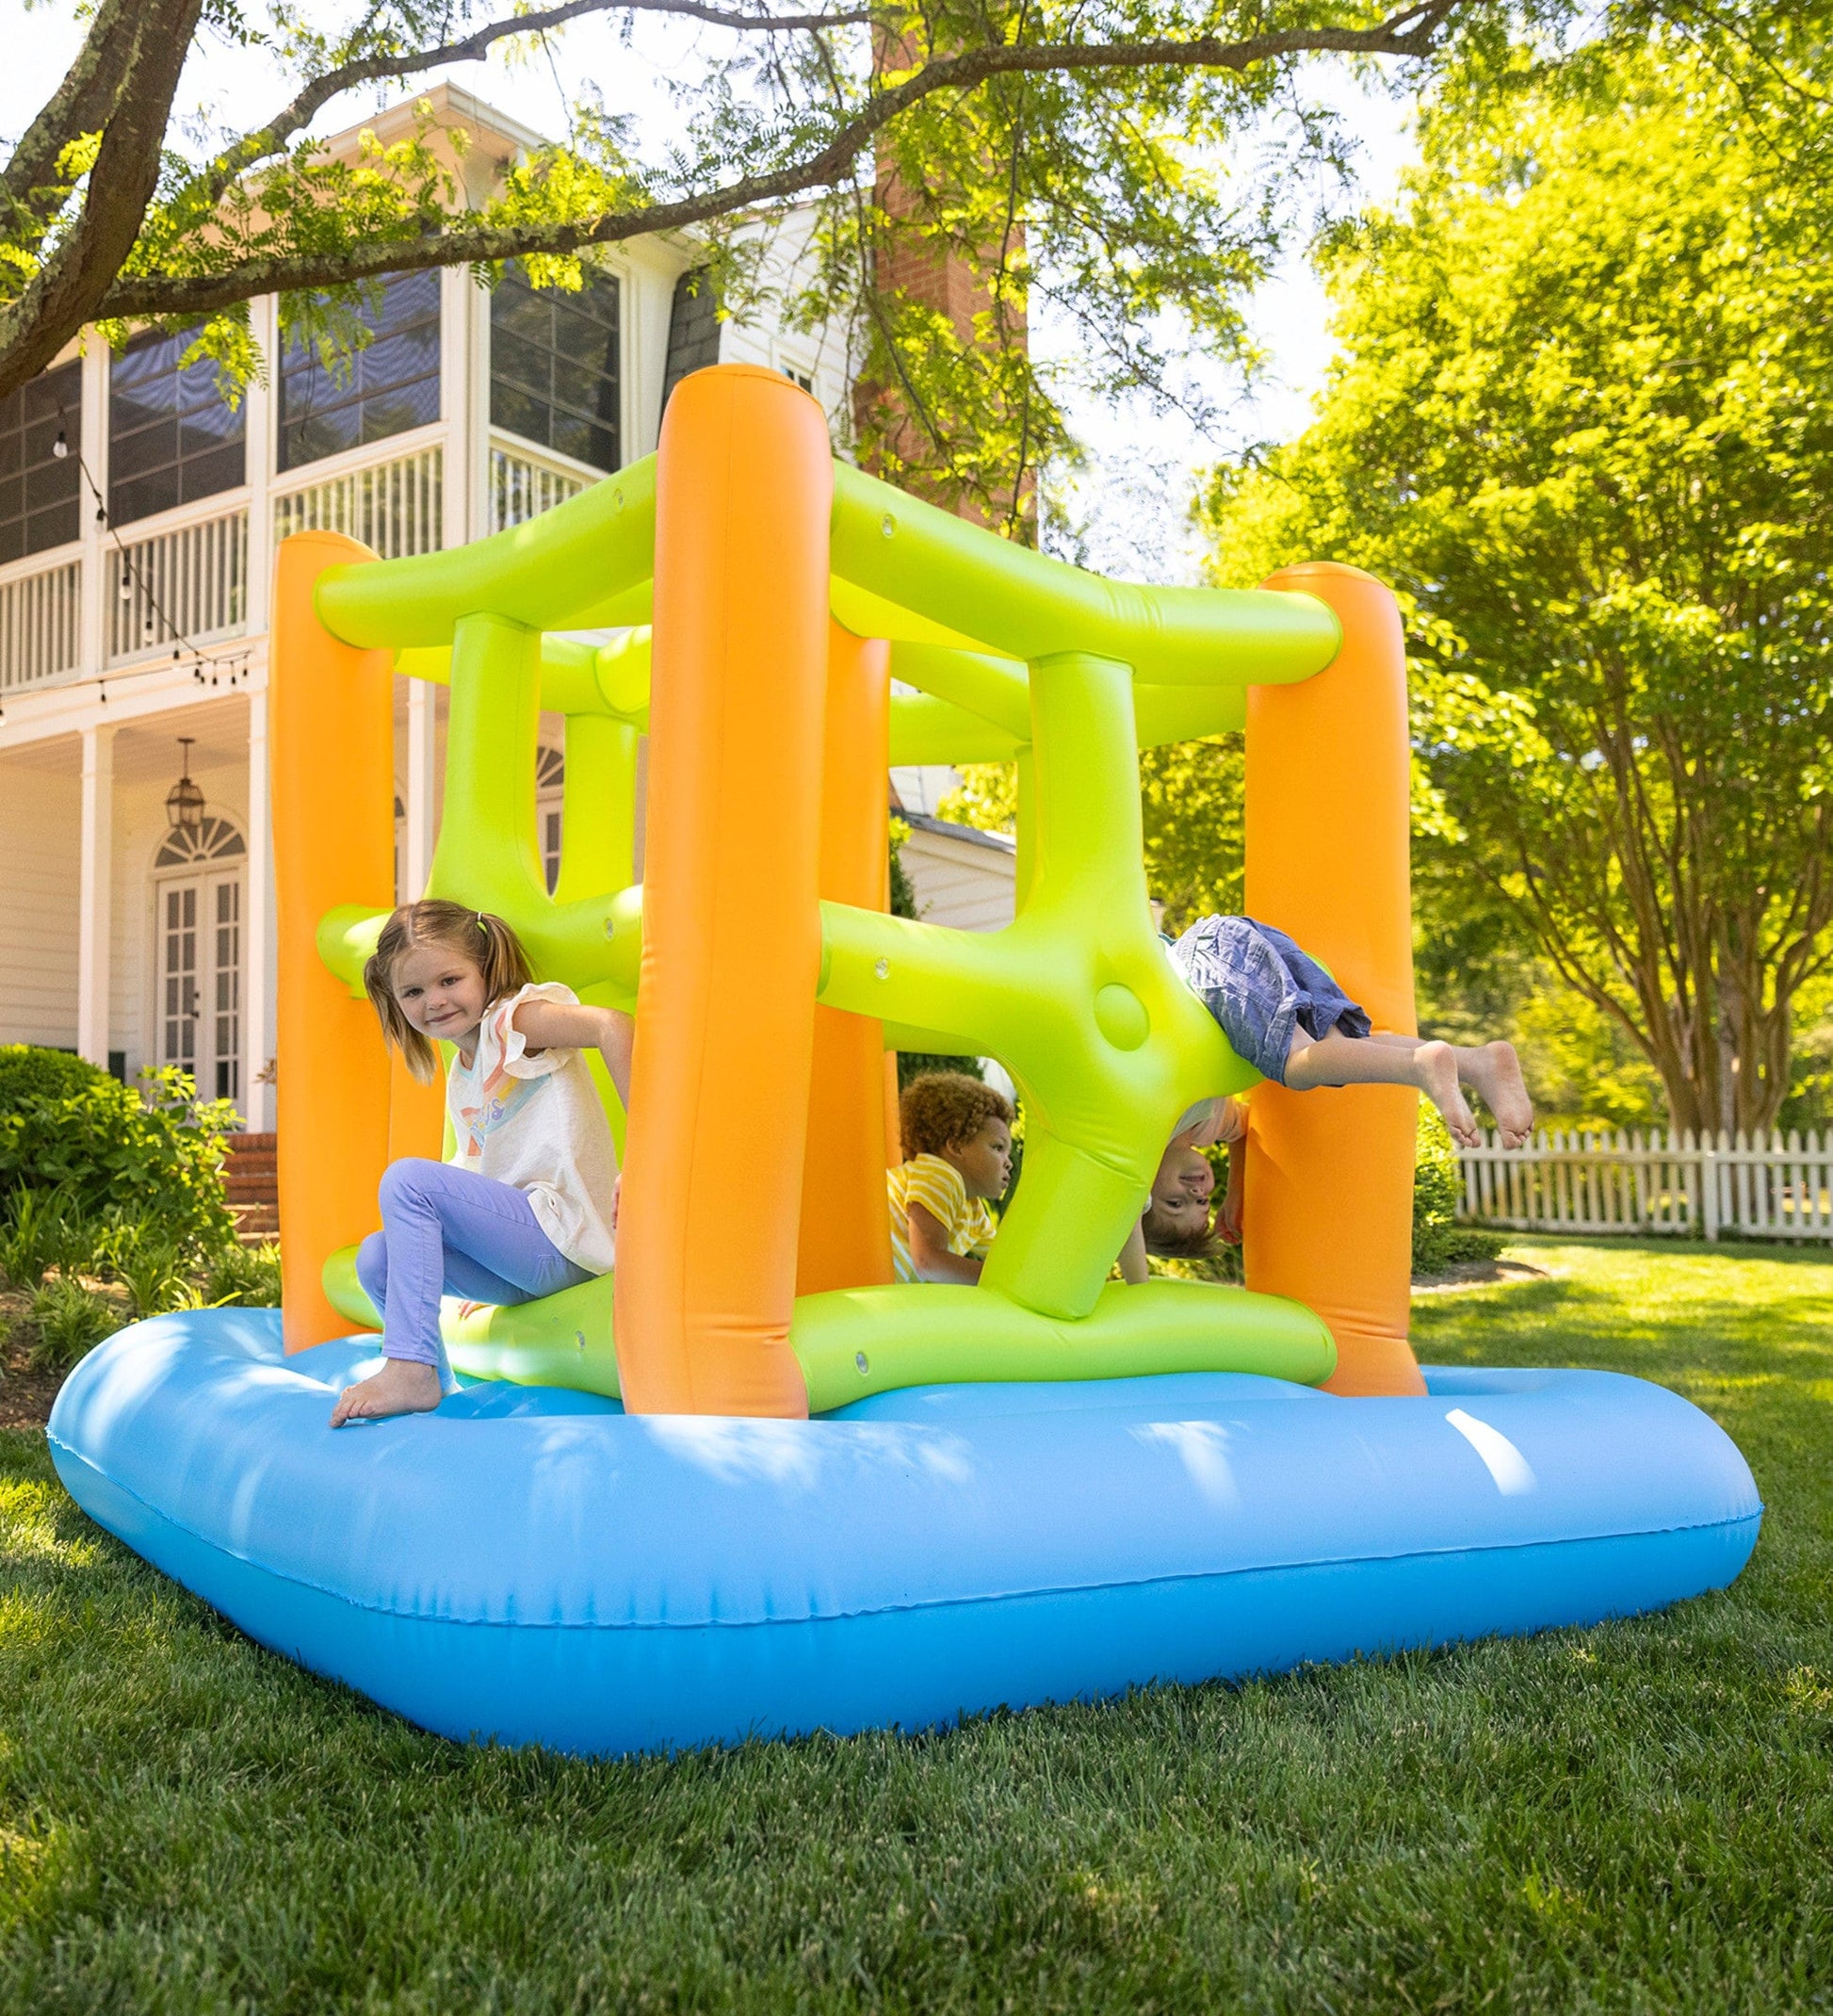 Bounce Time Gaming & Inflatables